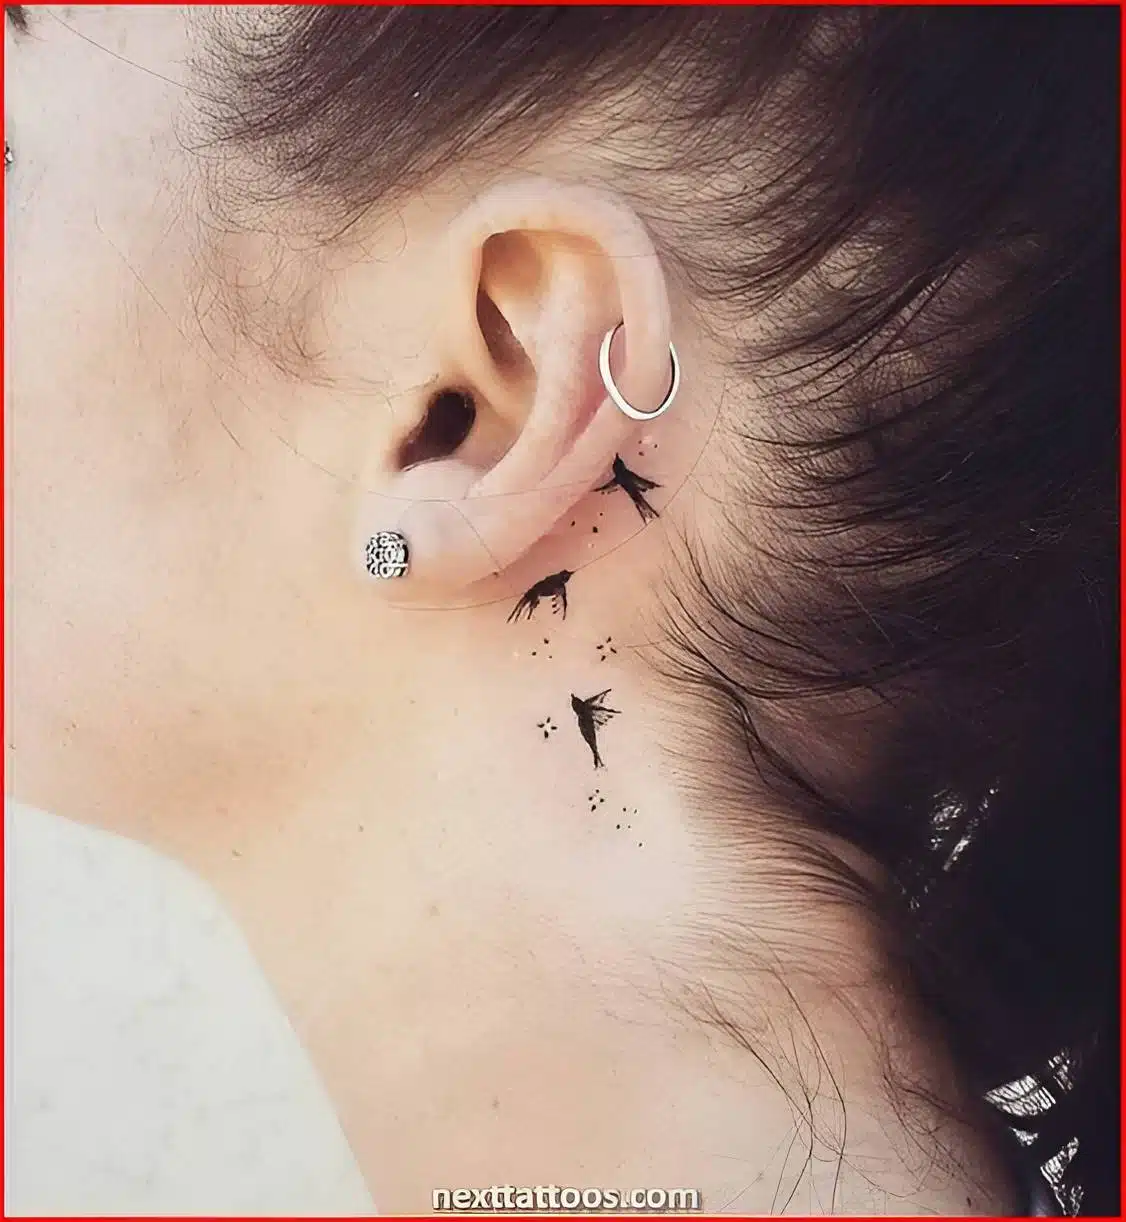 20 Elegant Mini Nape Tattoos To Bring Out Your Beauty - 155